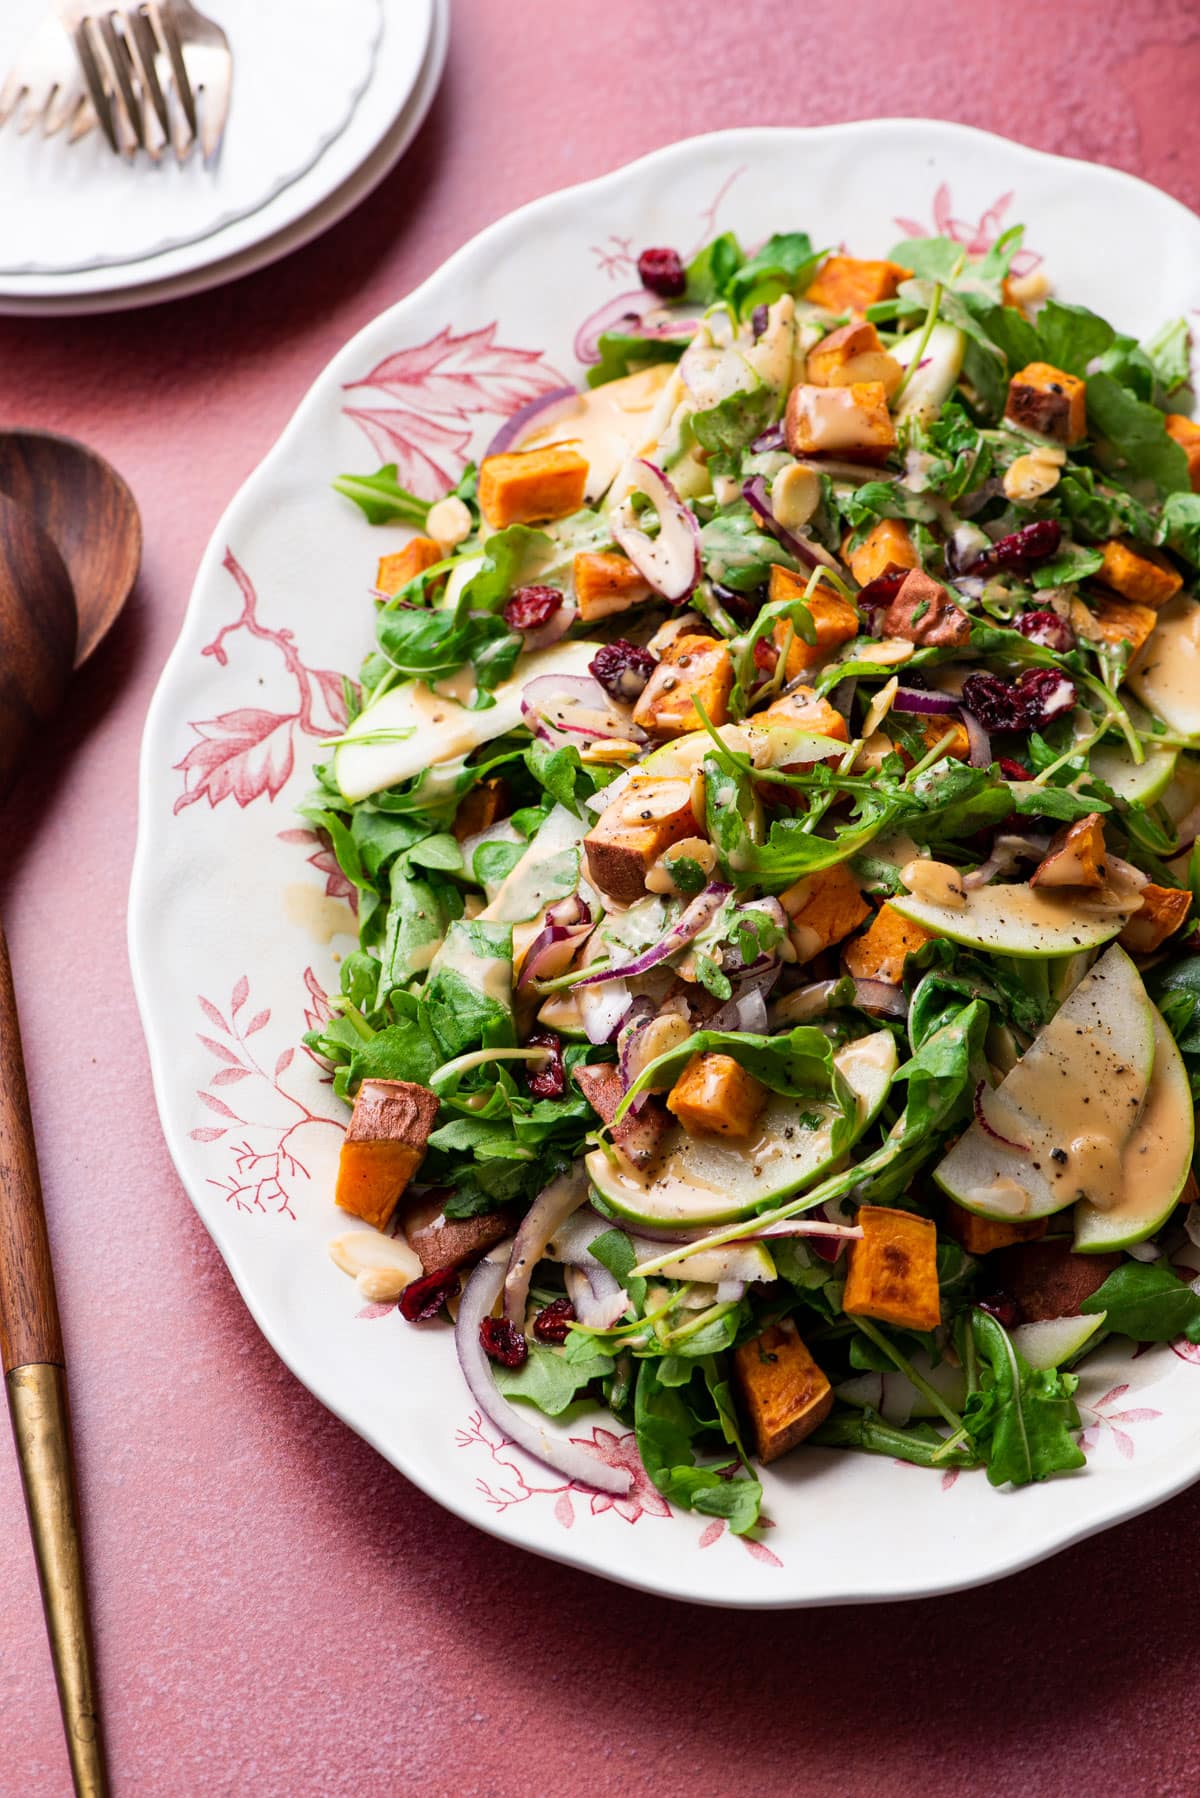 Arugula apple salad with sweet potatoes, cranberries, and balsamic dressing.